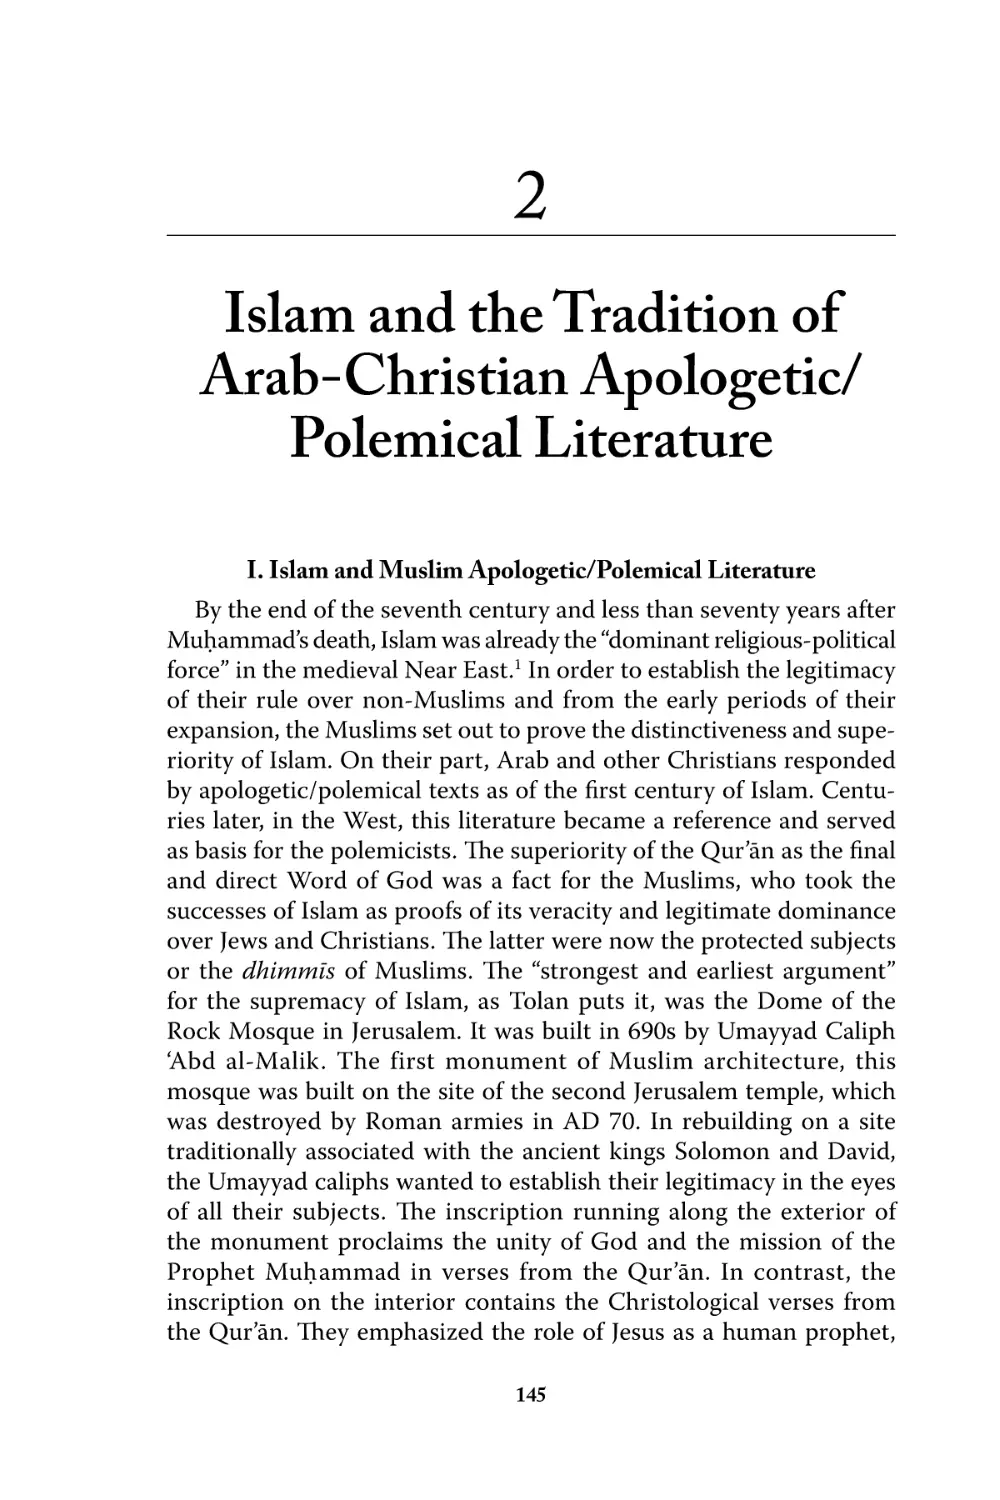 2 Islam and the Tradition of Arab-Christian Apologetic/Polemical Literature
I. Islam and Muslim Apologetic/Polemical Literature